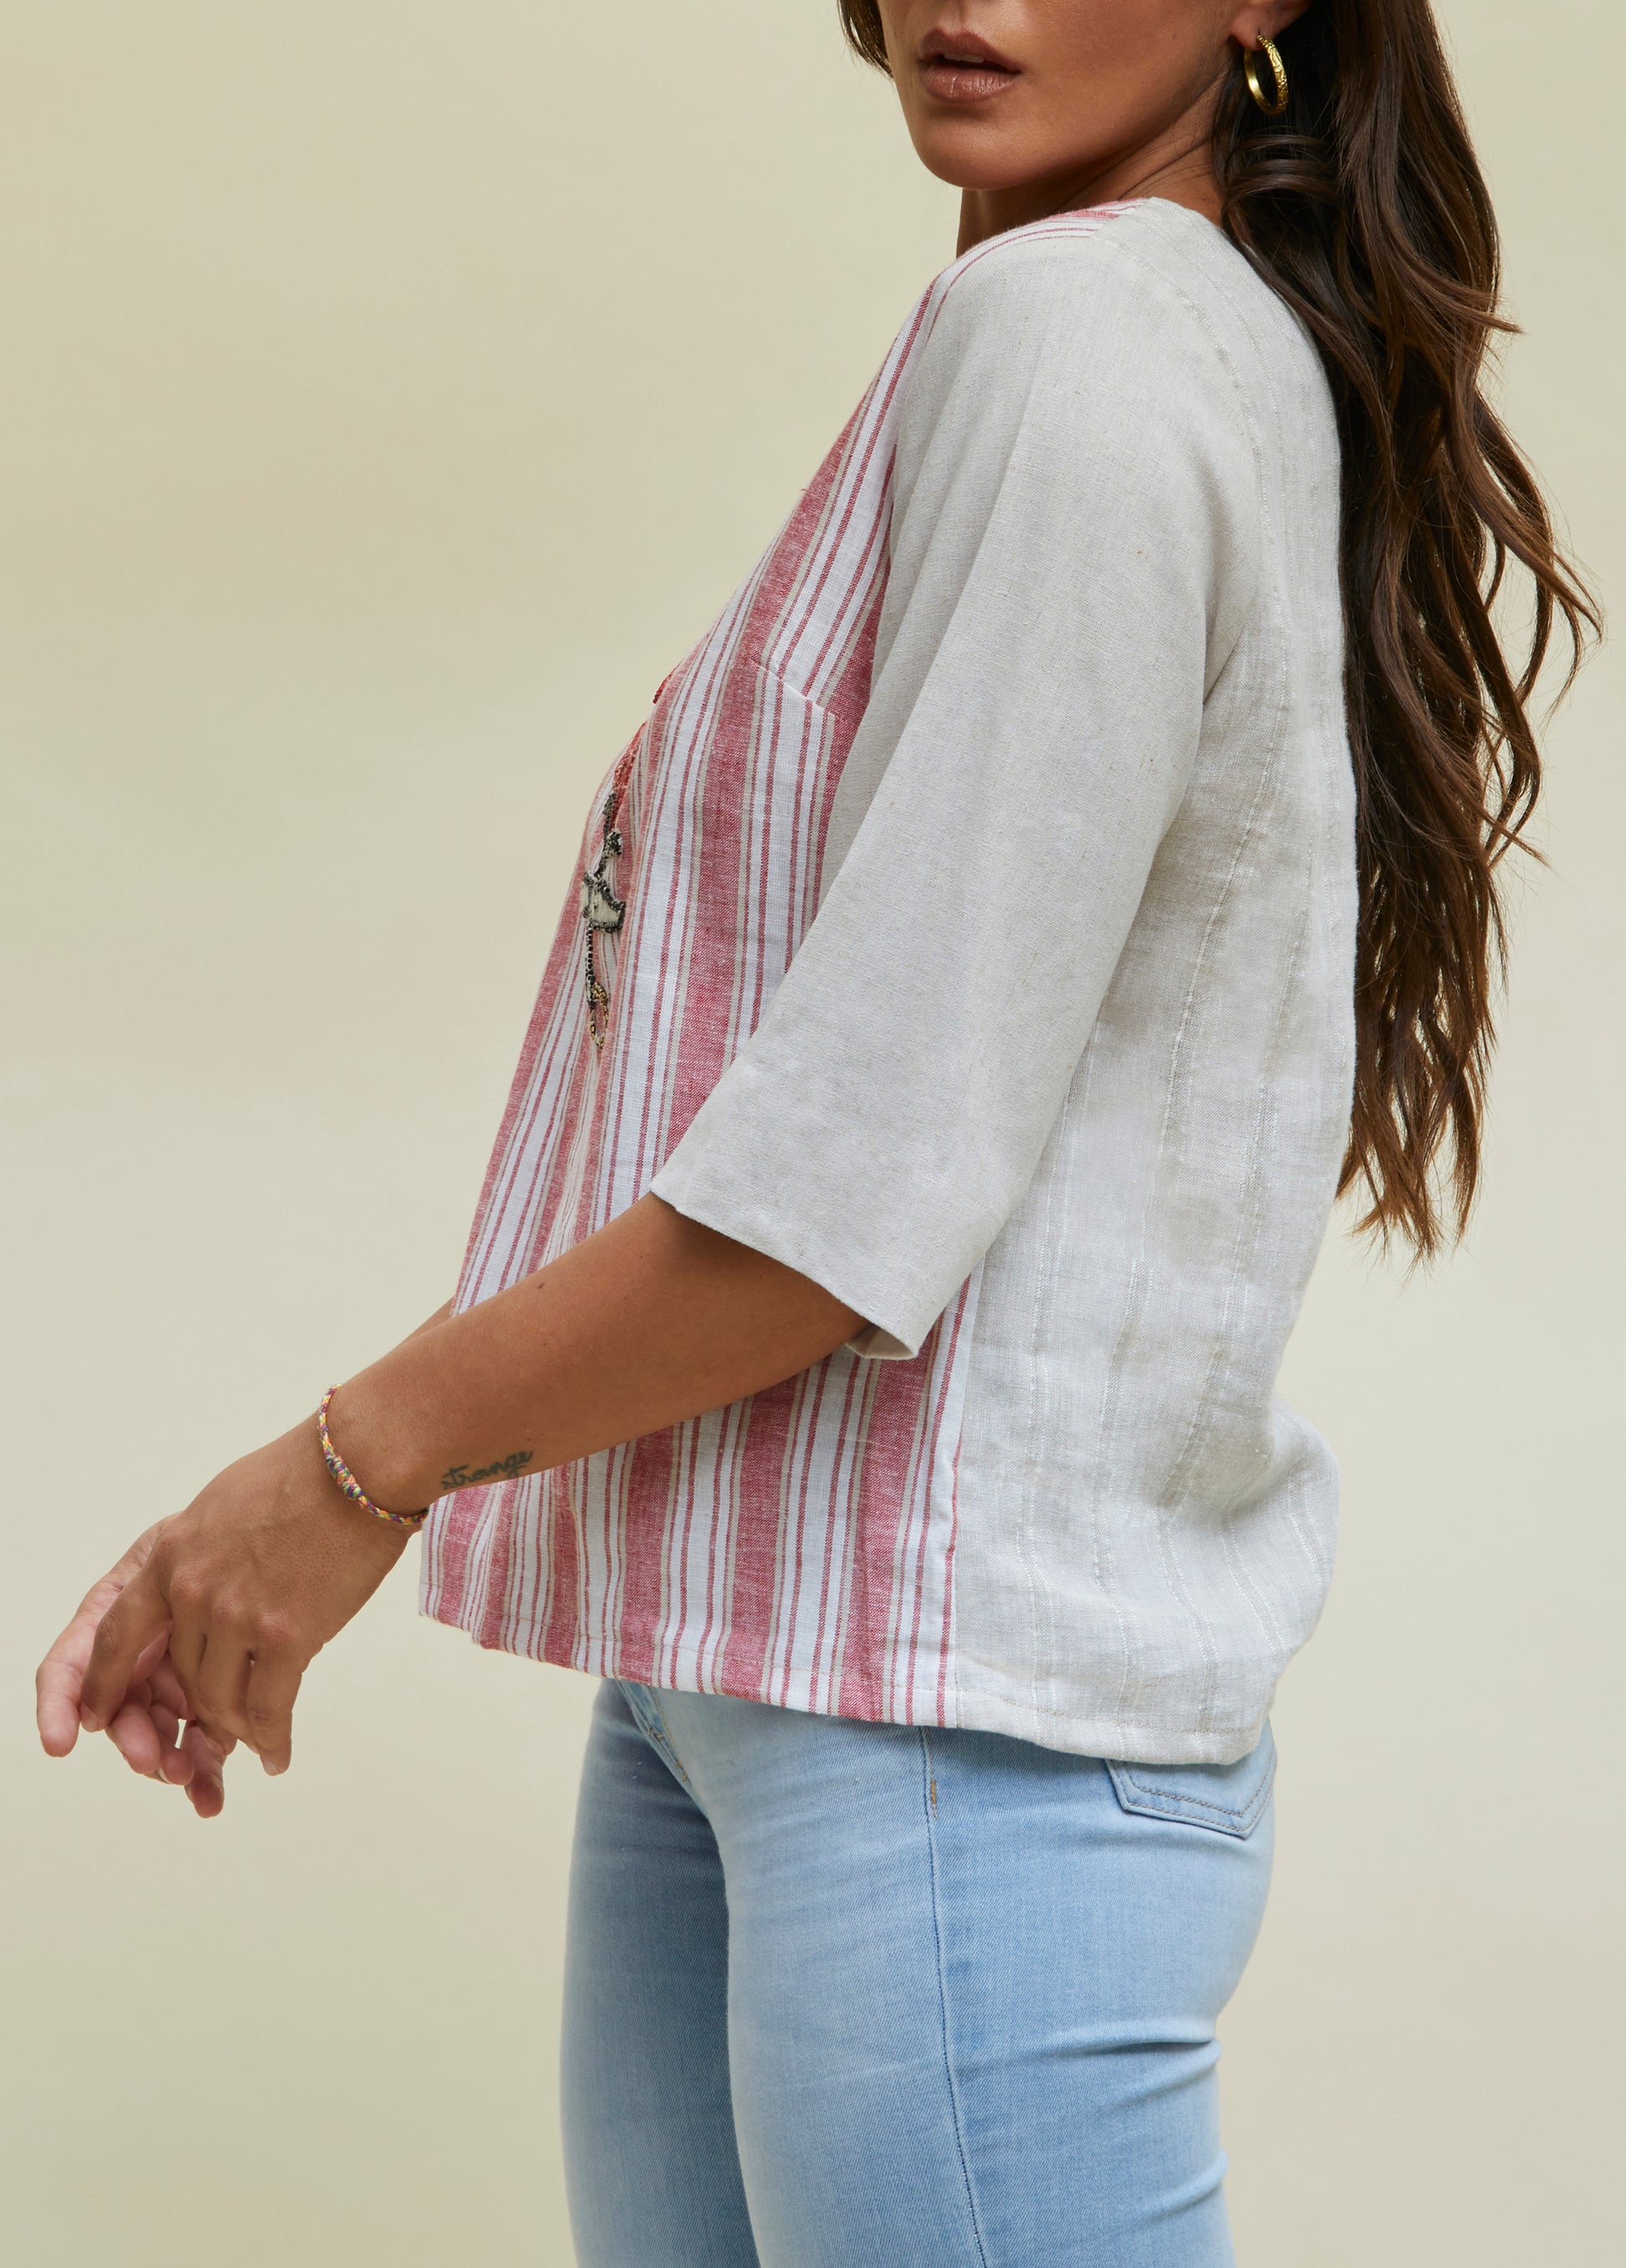 embroidered linen blouse in beige and red stripes by sartoria ferdinando fusco sorrento